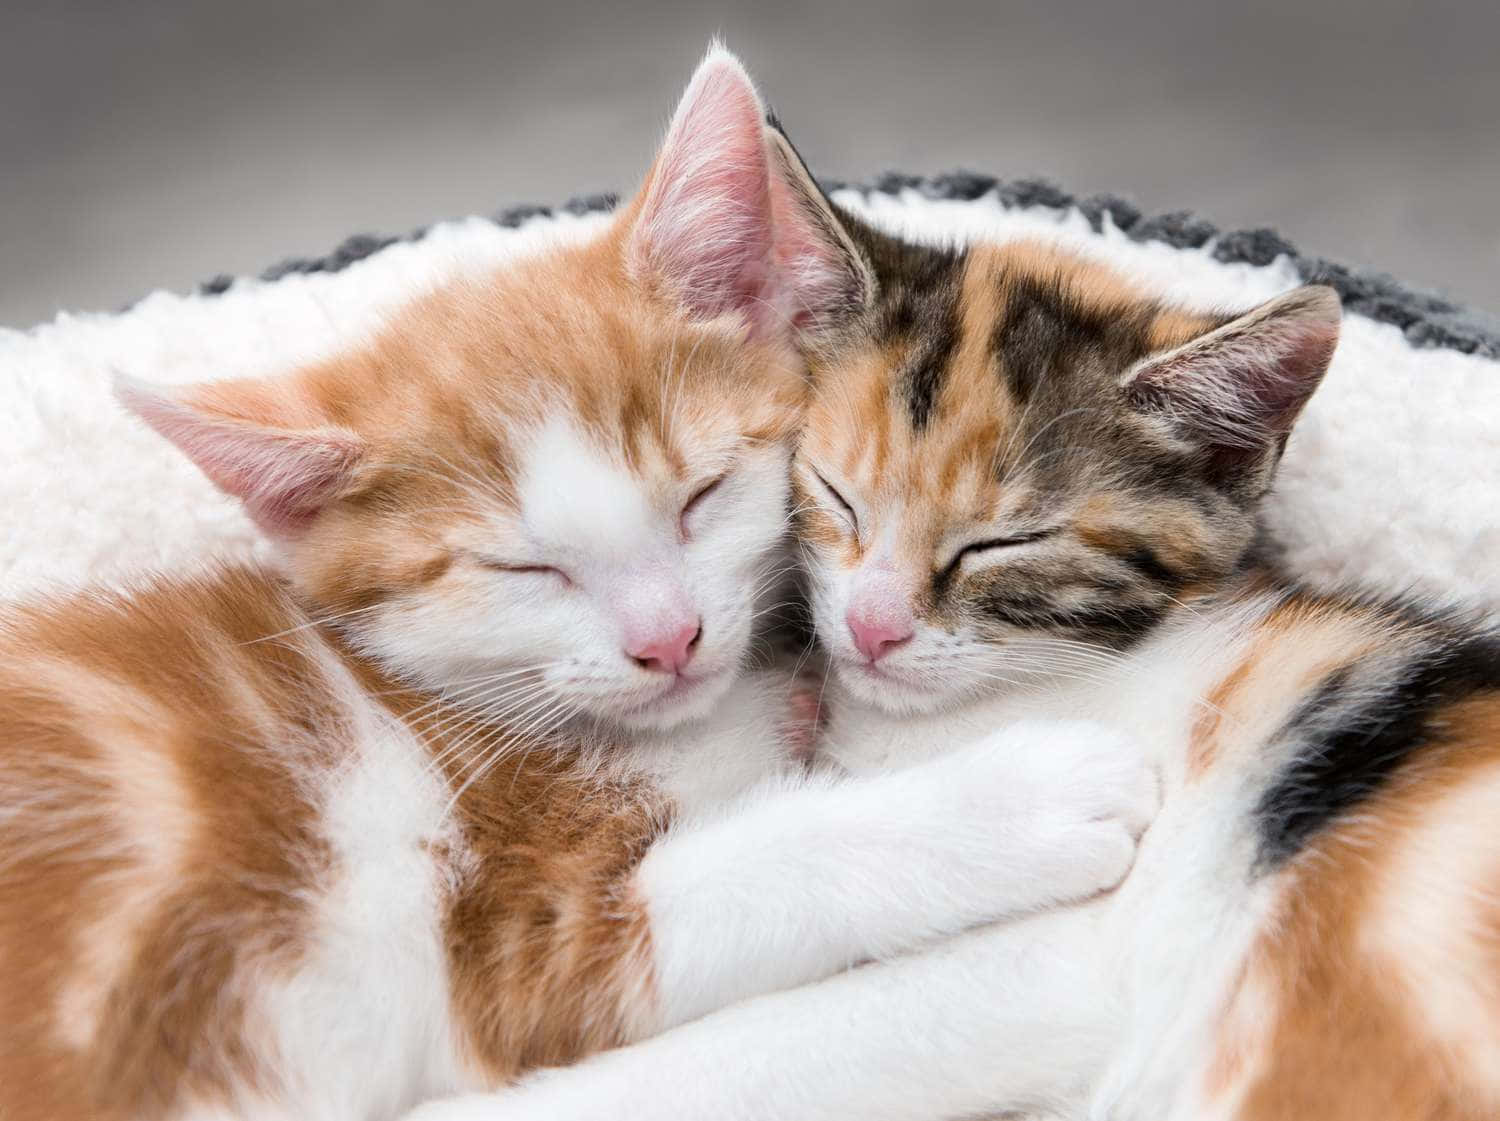 Cuddling Cute Cats Pictures